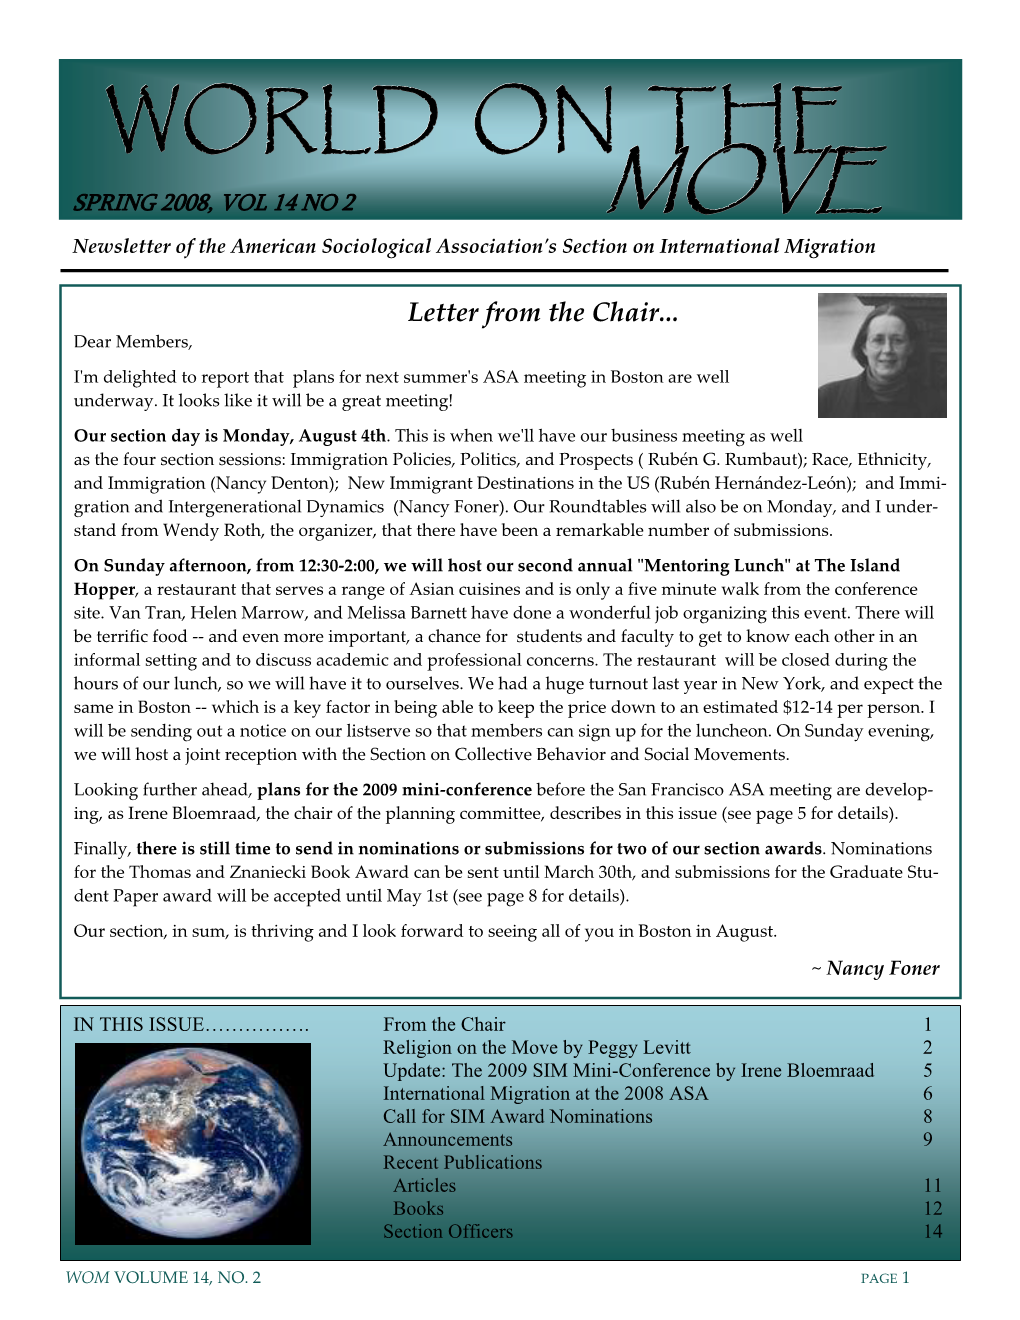 SPRING 2008, VOL 14 NO 2 MOVE Newsletter of the American Sociological Associationʹs Section on International Migration